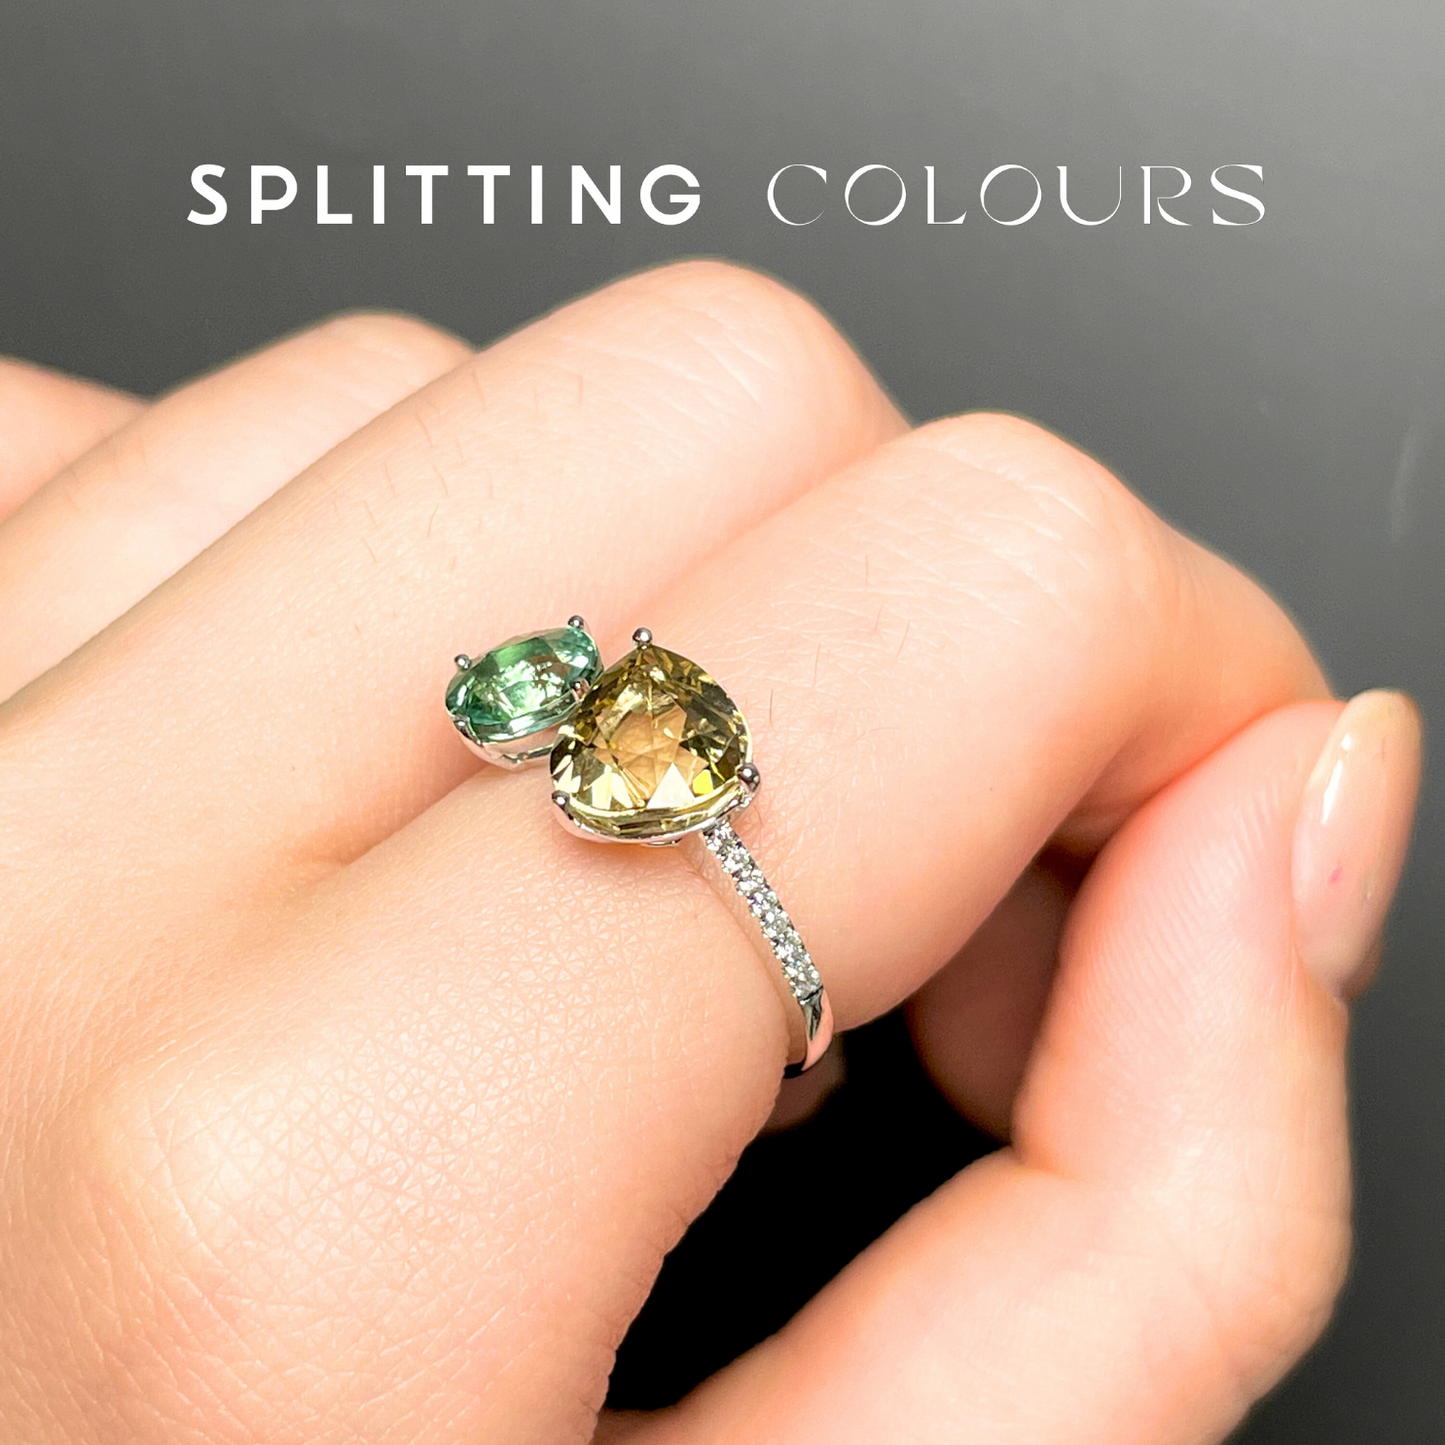 The Satellite Ring – 3.39ct Mint Green and Pale Orange Tourmalines with Diamonds